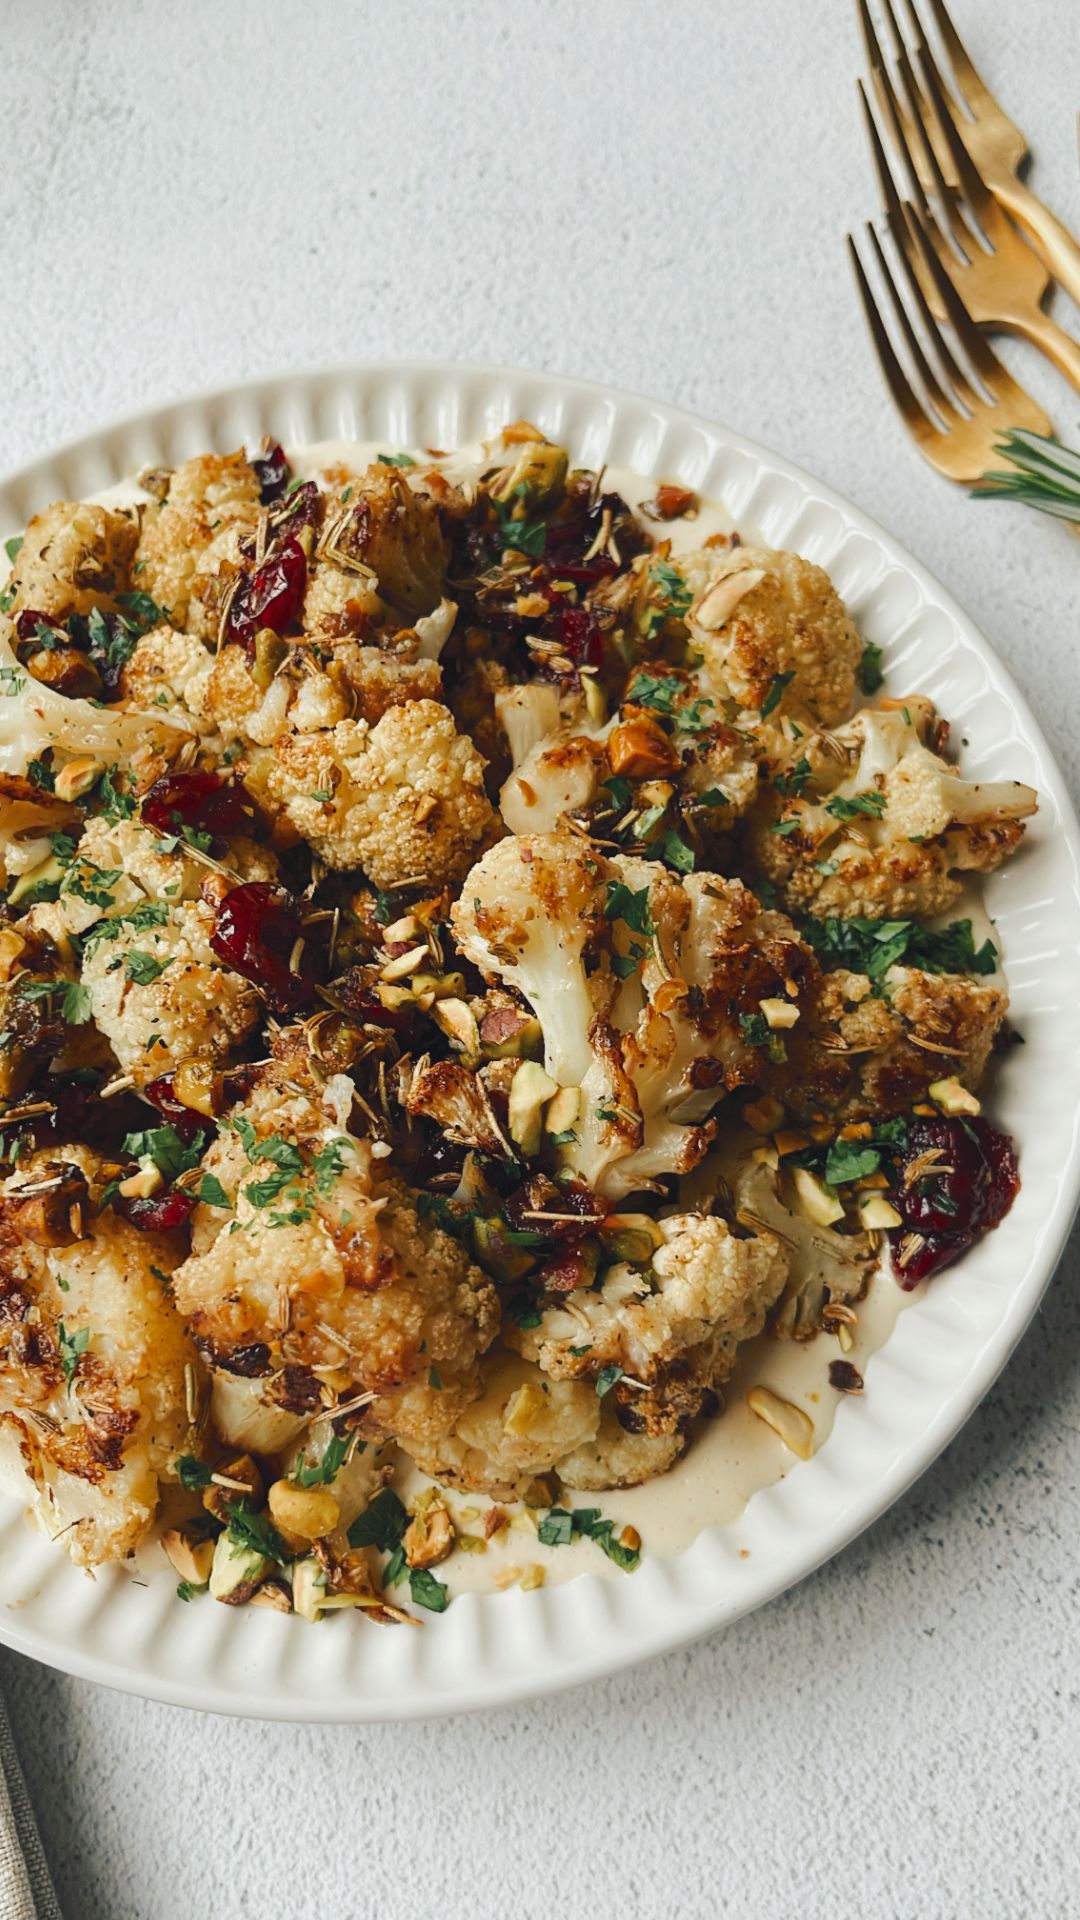 Roasted cauliflower with rosemary, pistachios and cranberries